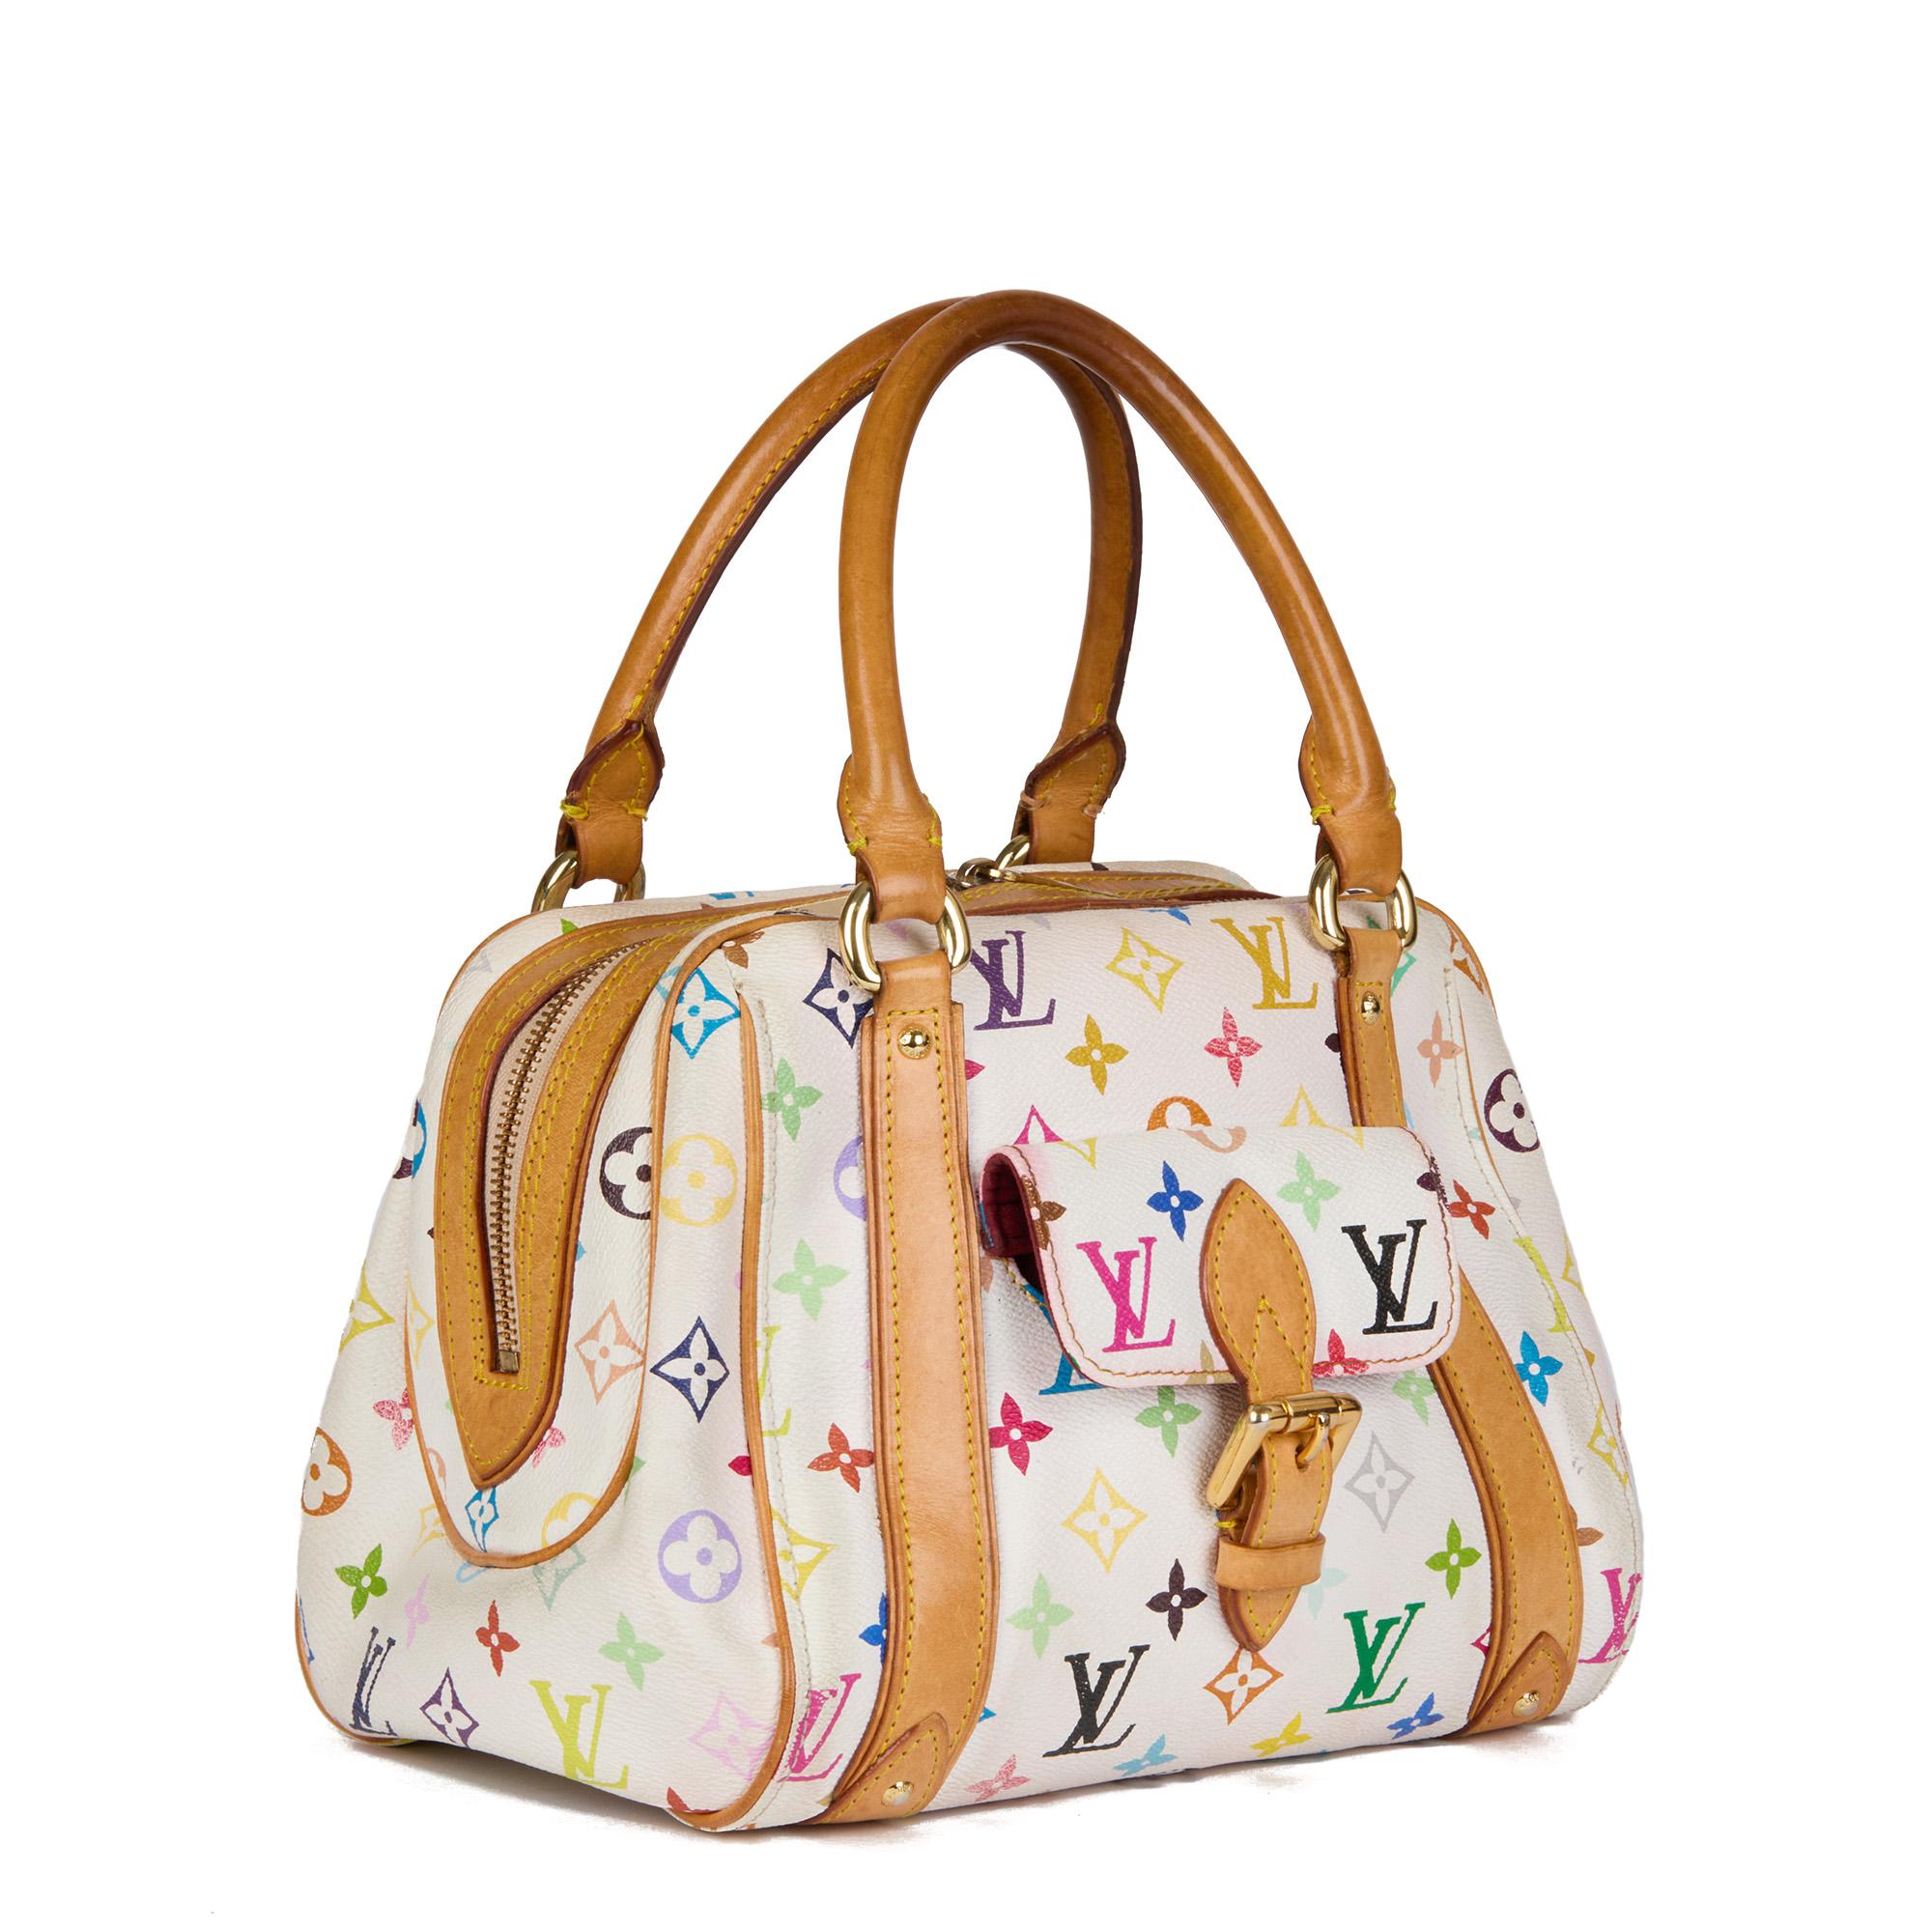 LOUIS VUITTON
White Multicolore Monogram Coated Canvas & Vachetta Leather Priscilla

Xupes Reference: CB617
Serial Number: SP00**
Age (Circa): 2000
Accompanied By: Louis Vuitton Dust Bag
Authenticity Details: Date Stamp
Gender: Ladies
Type: